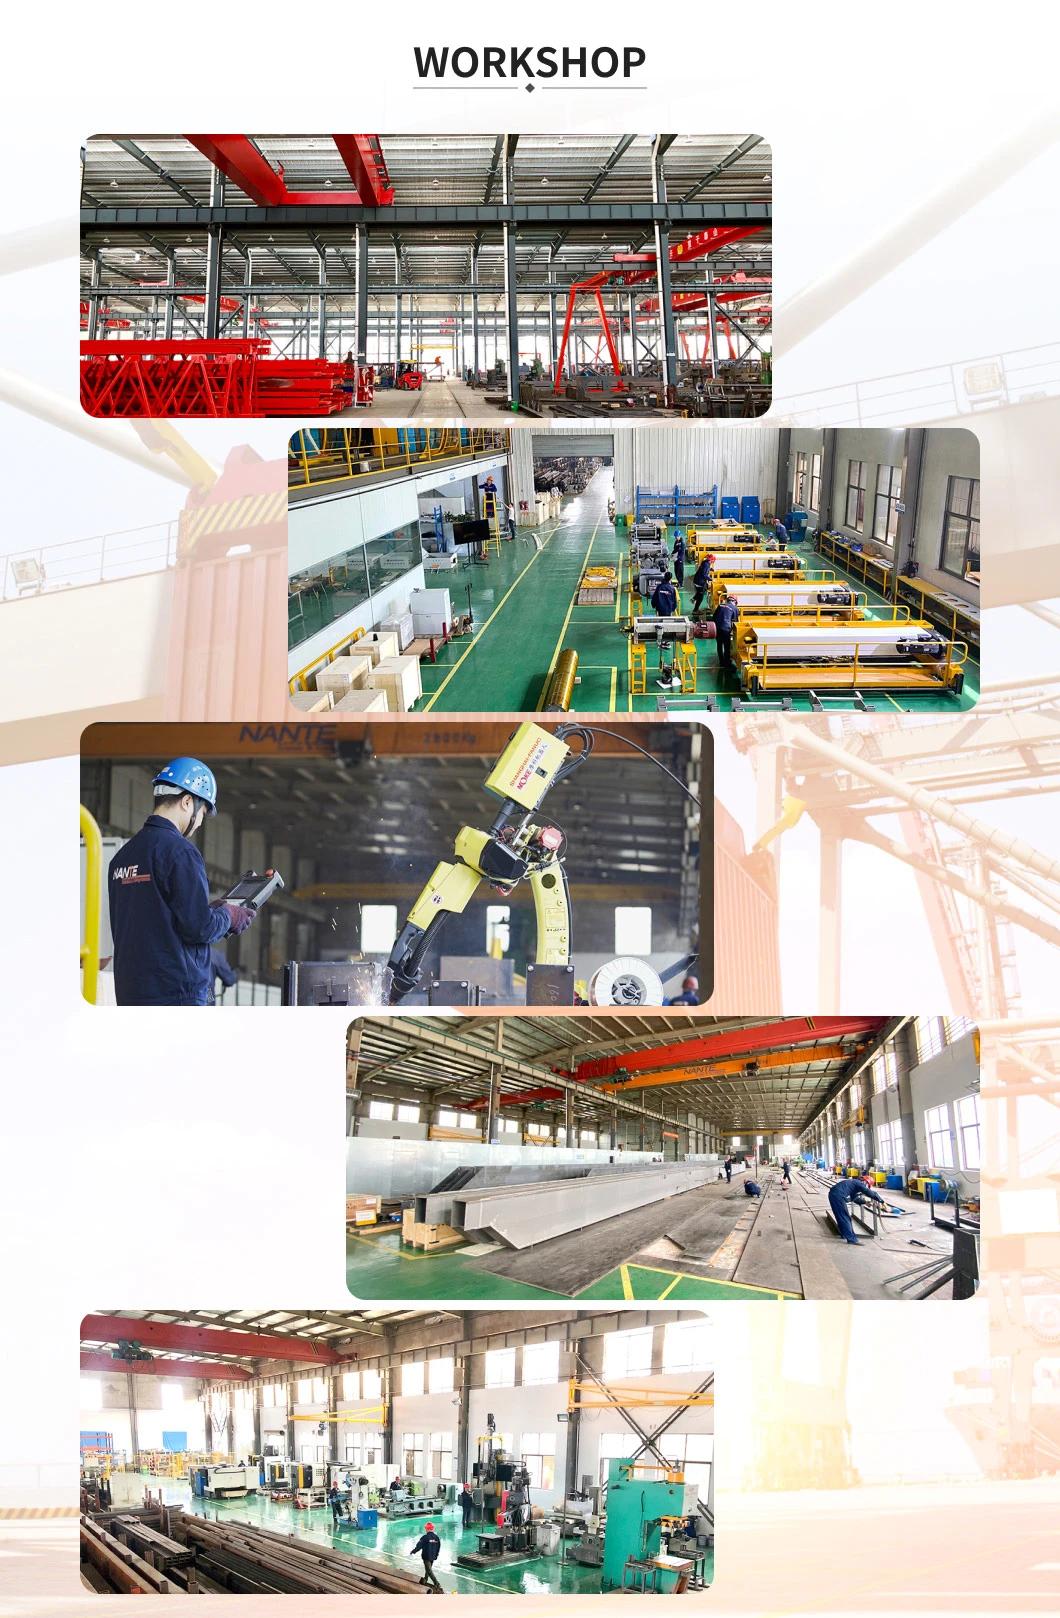 Carefully Crafted Hot Selling 1~20t Double Girder Overhead Crane